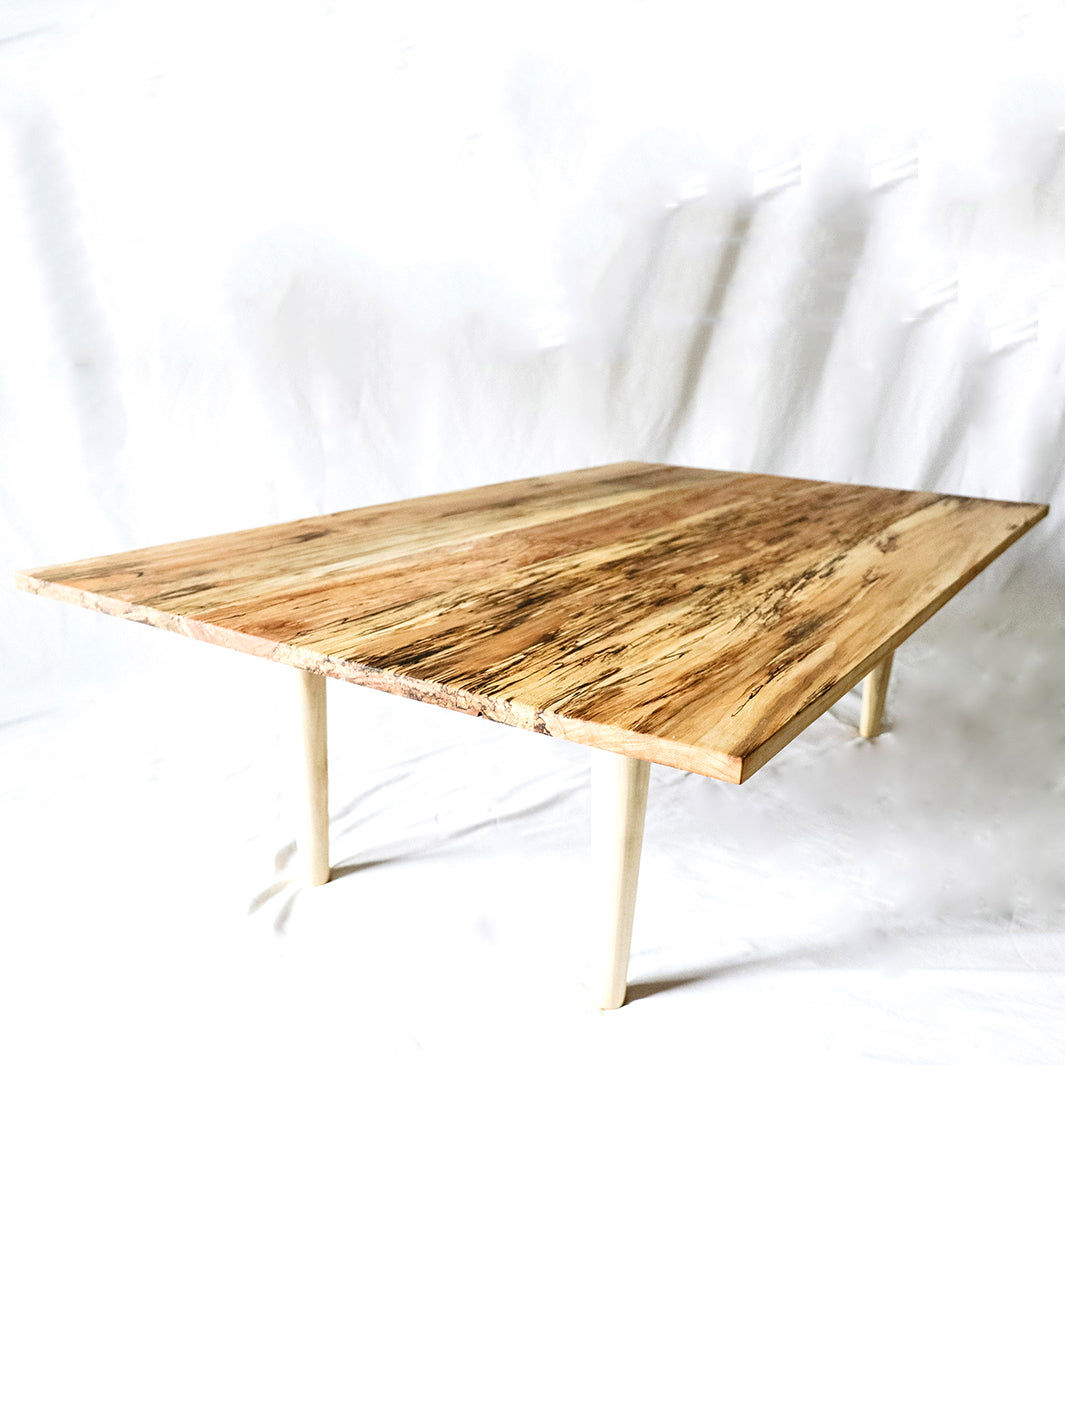 Spalted Maple Coffee Table Earthly Comfort Coffee Tables 960-3